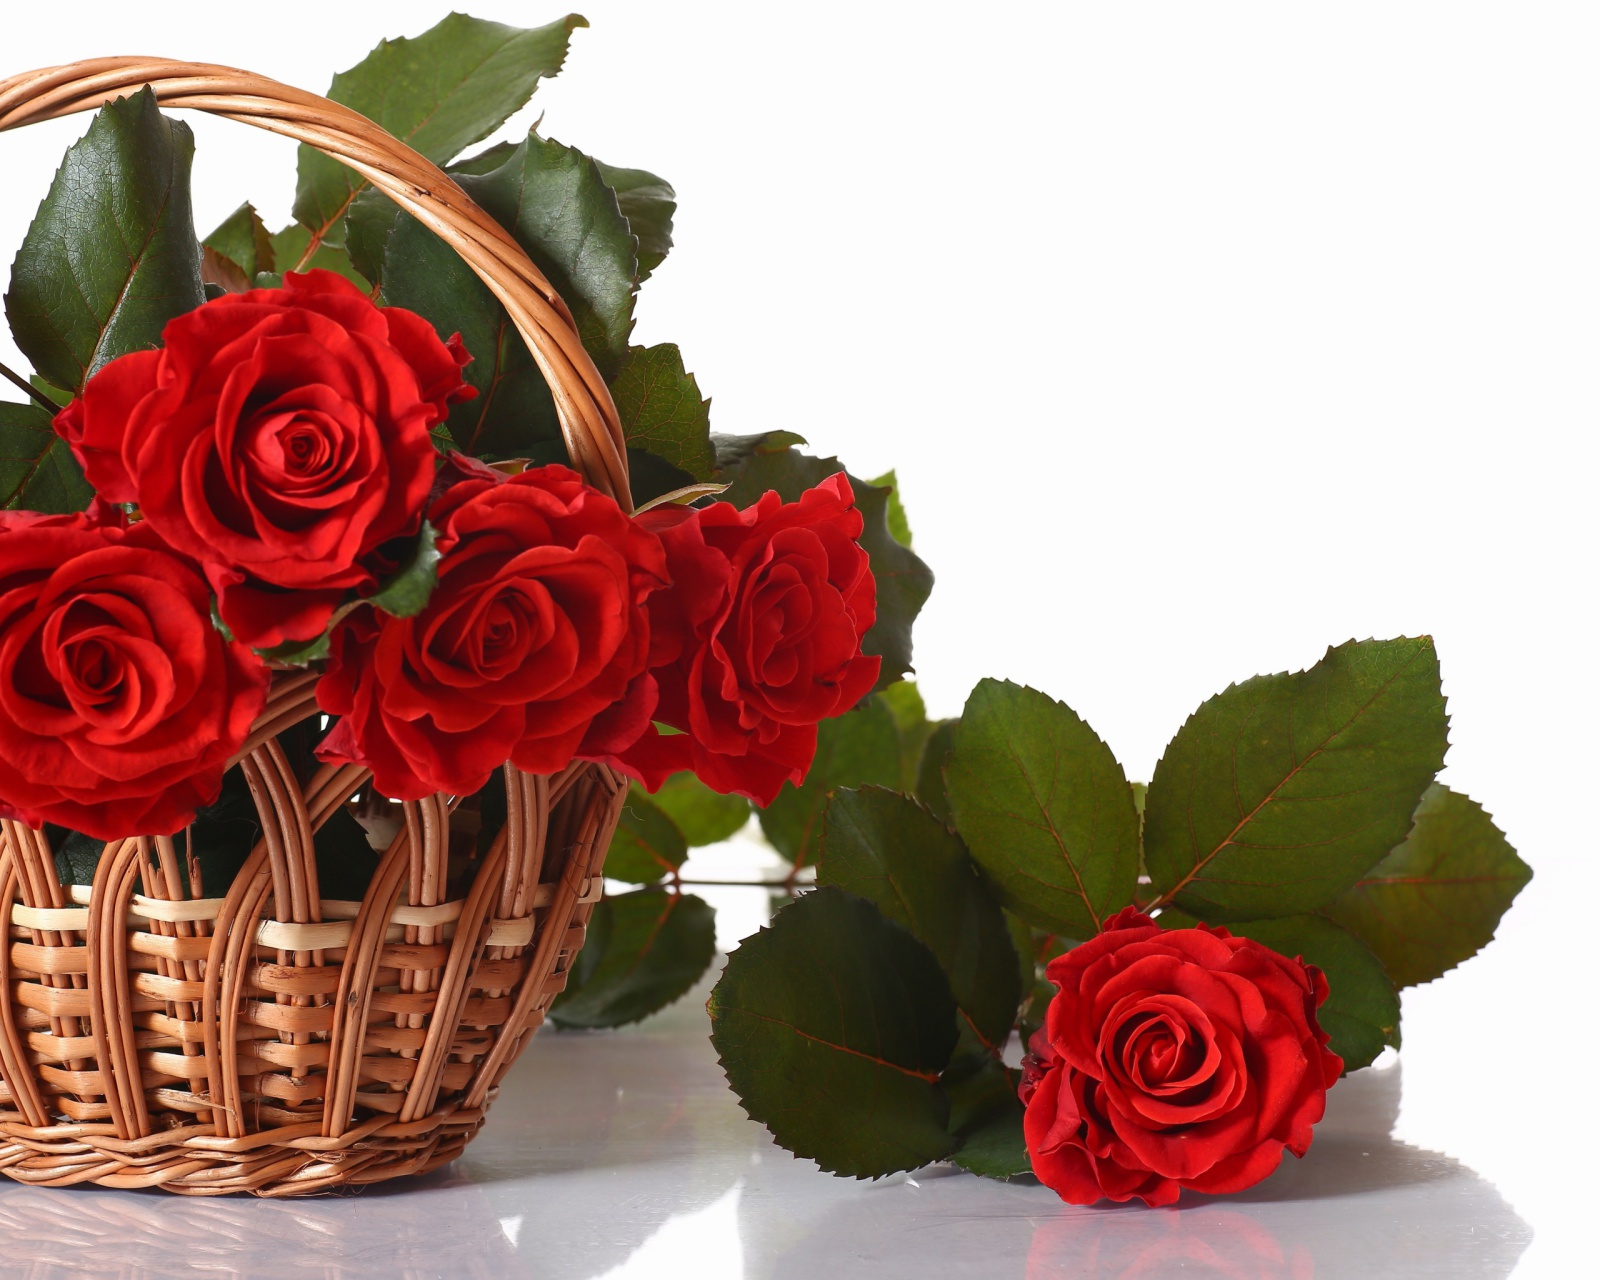 Basket with Roses wallpaper 1600x1280